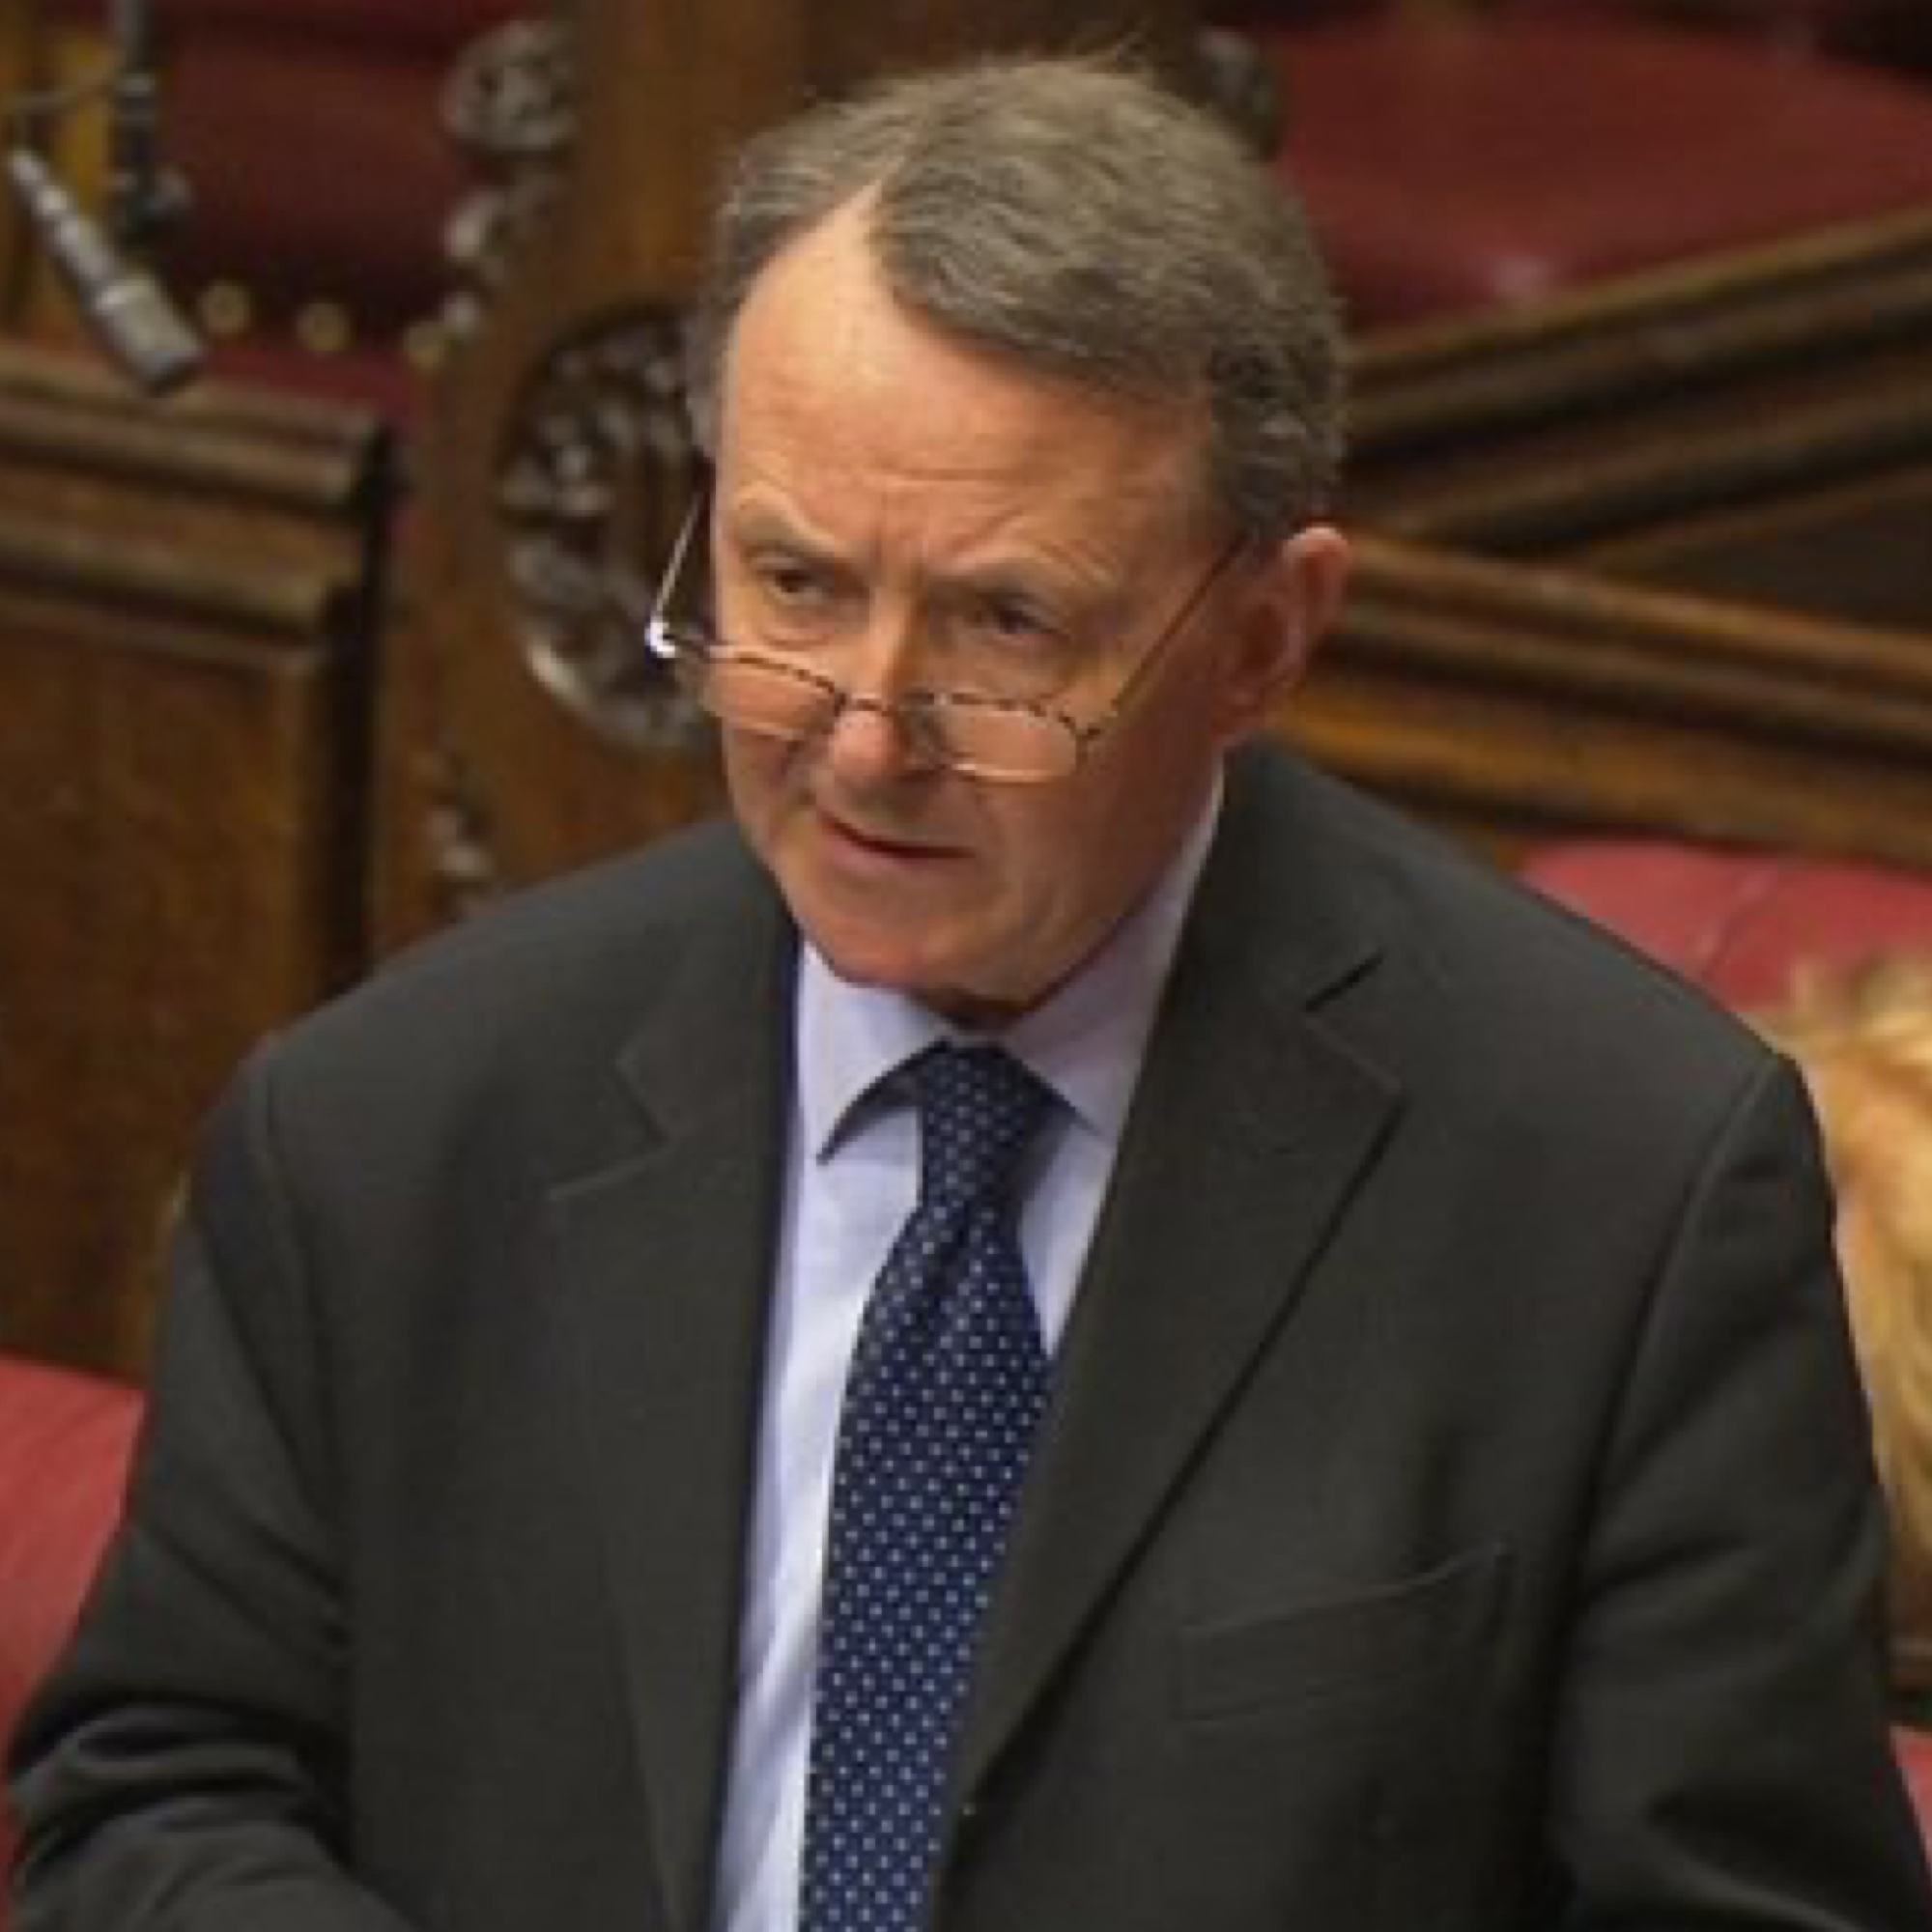 Alton speaking in the House of Lords